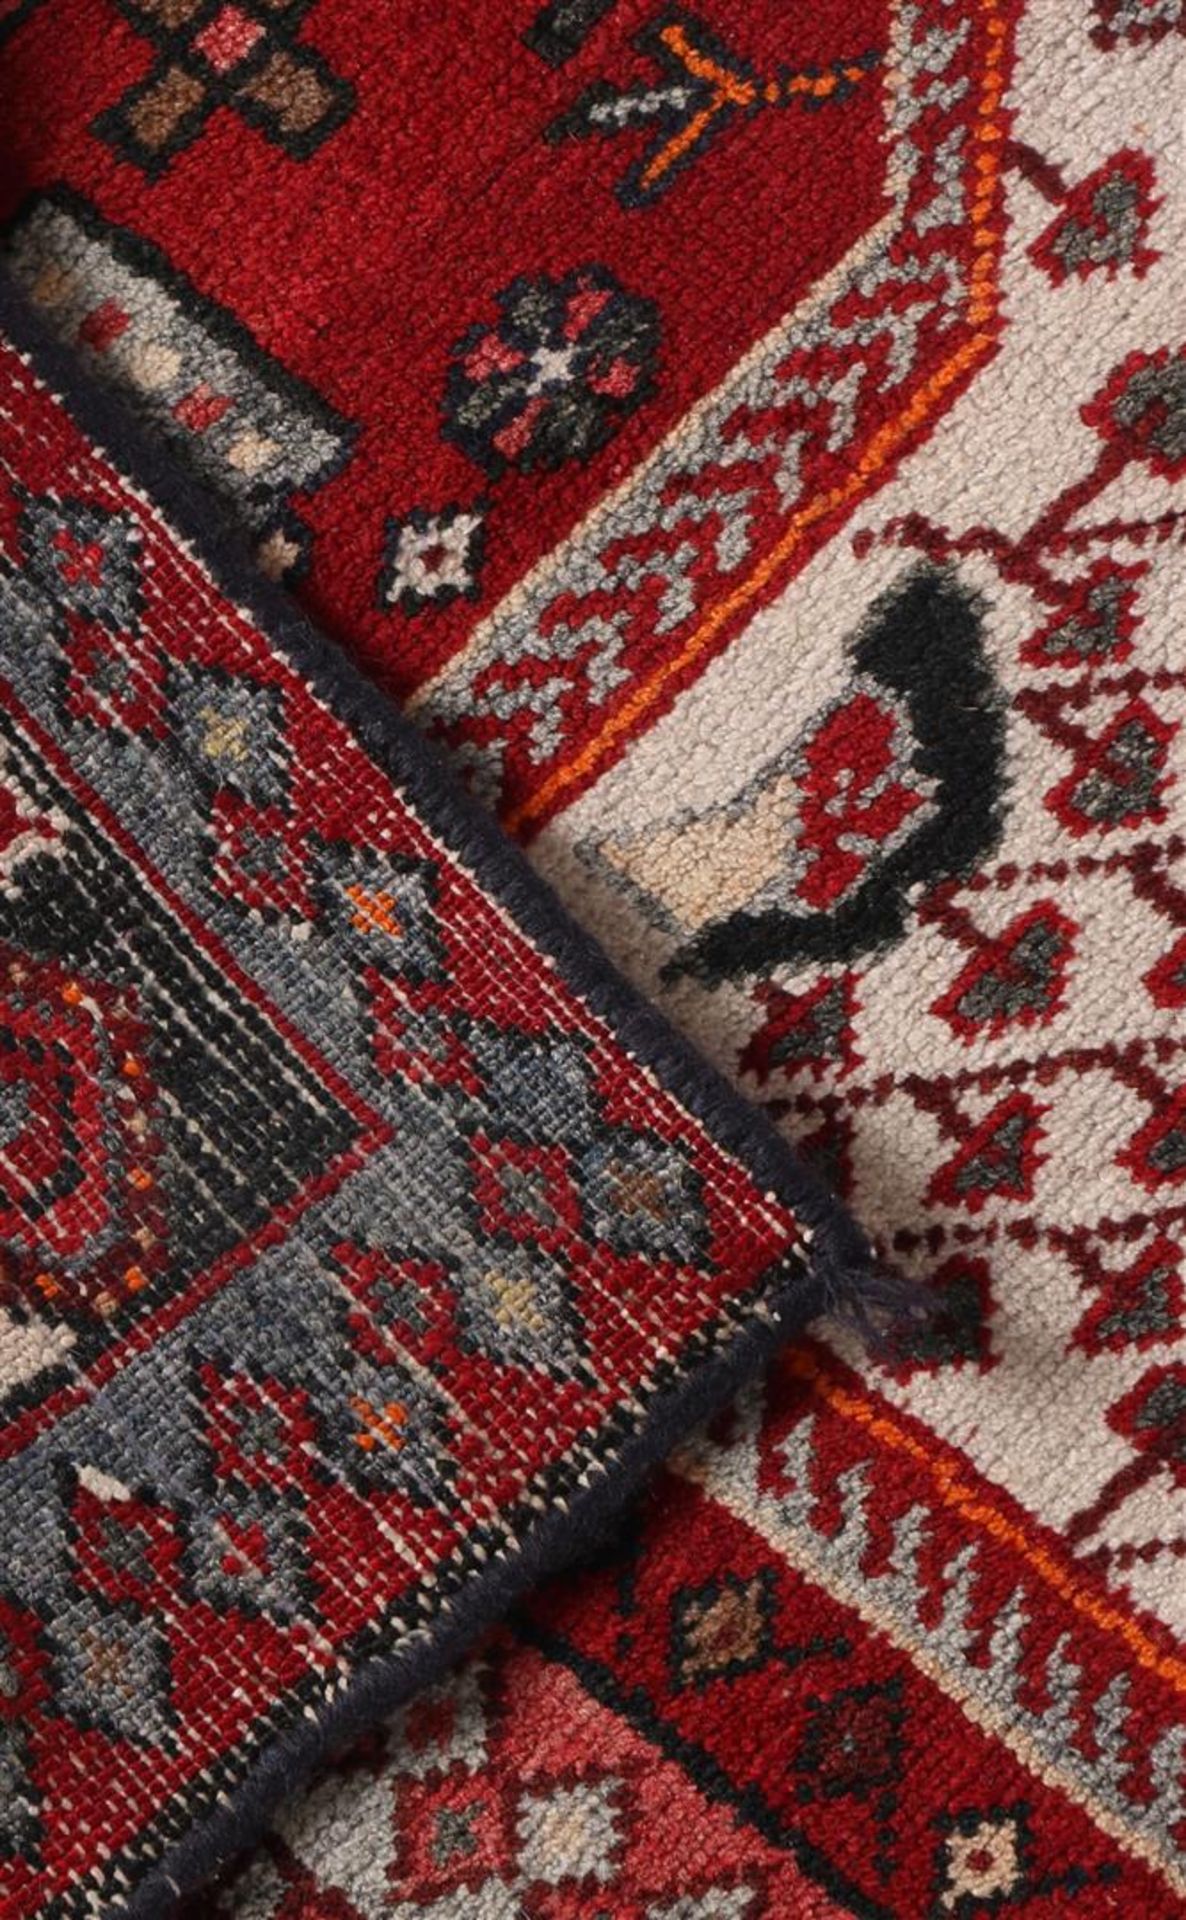 Hand-knotted oriental carpet, European - Image 4 of 4